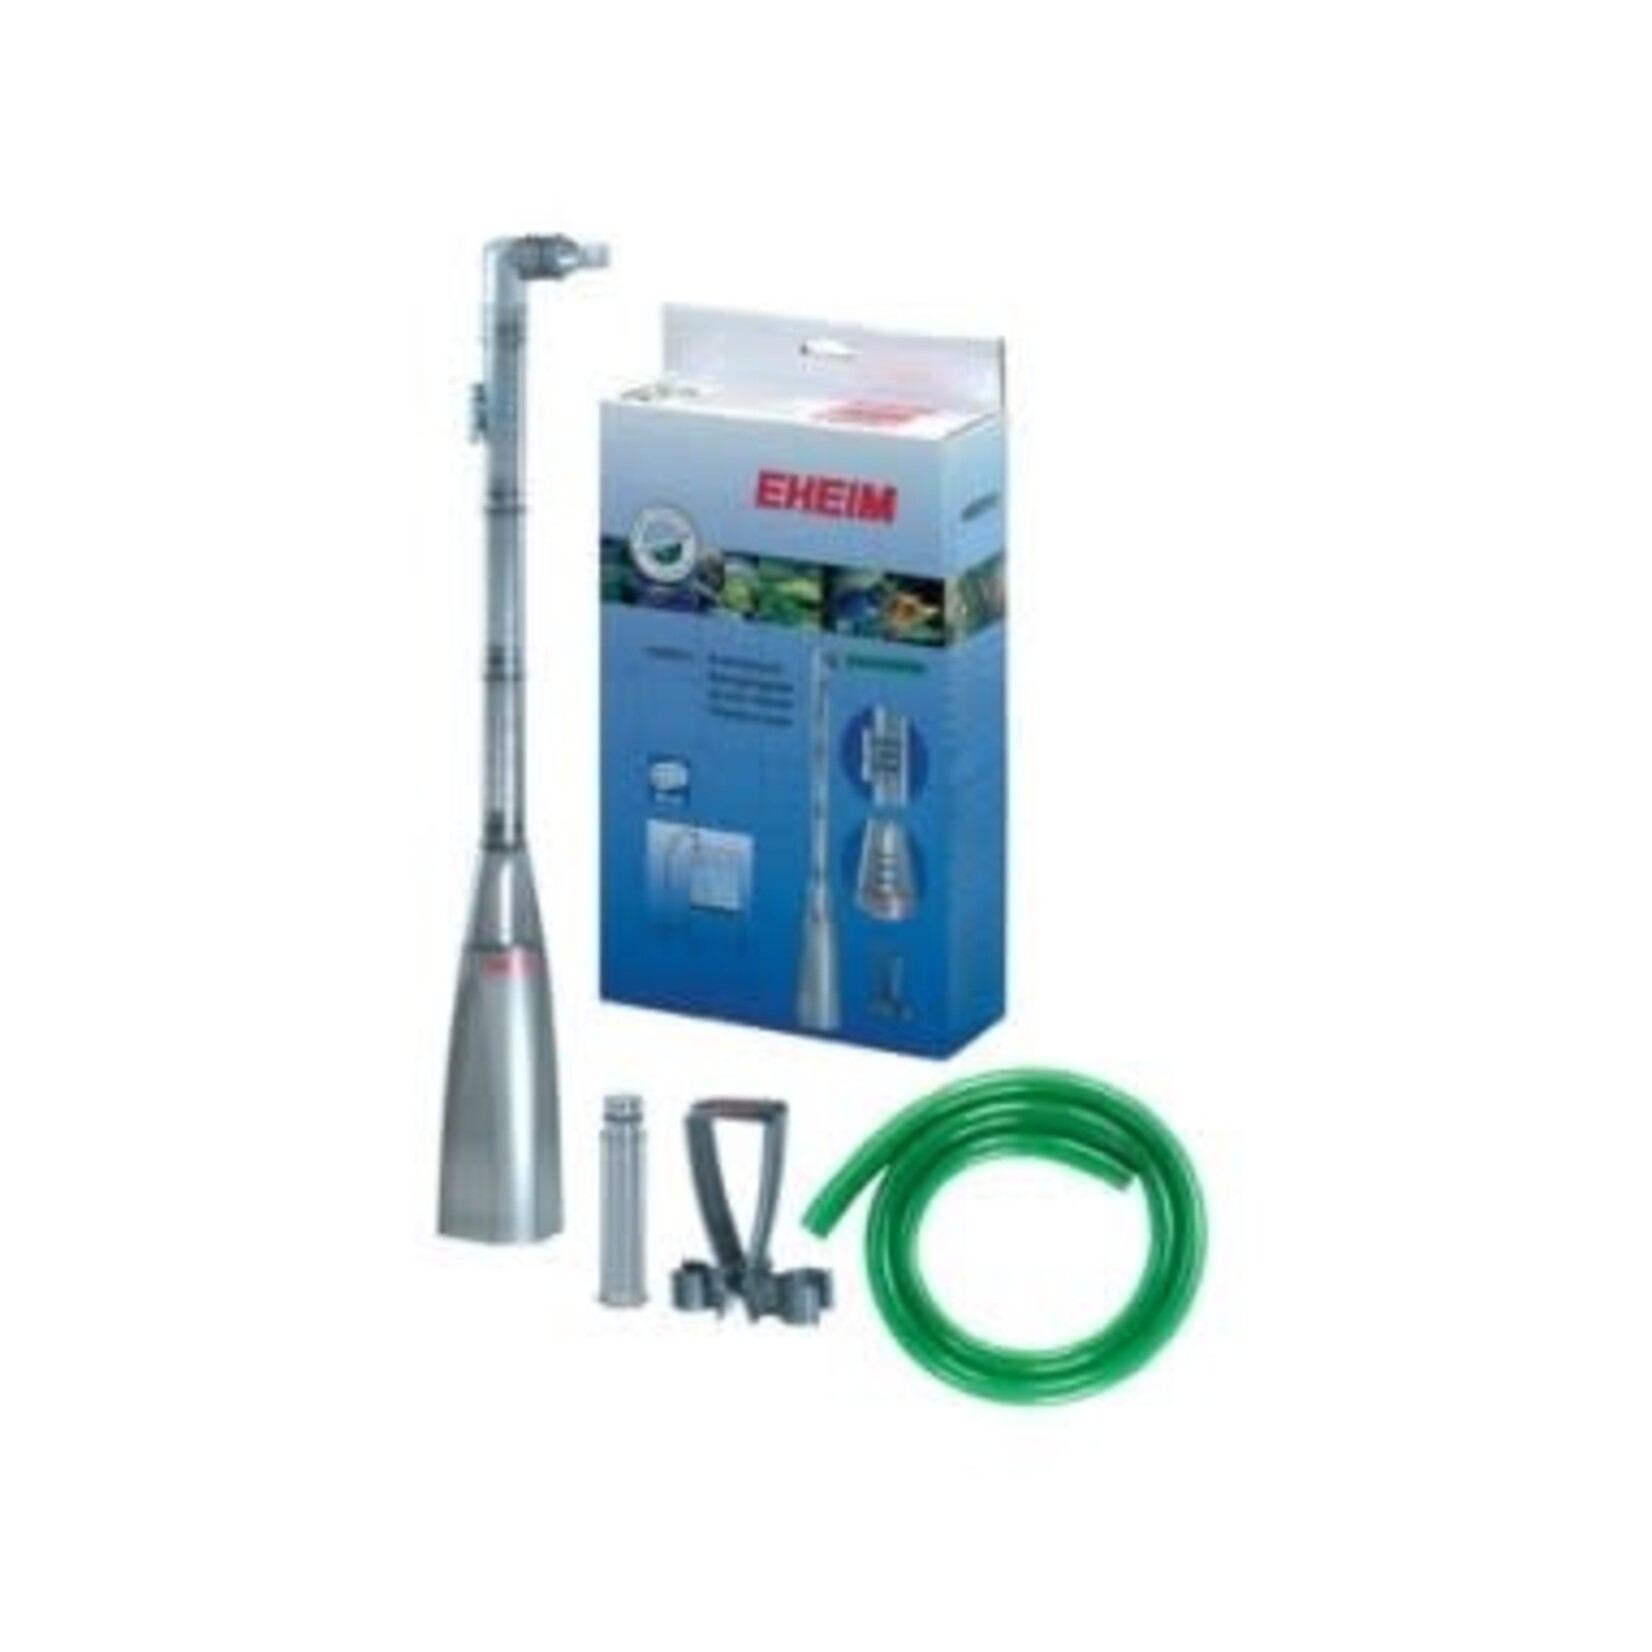 Eheim floor cleaning set with 2 m hose + safety clip